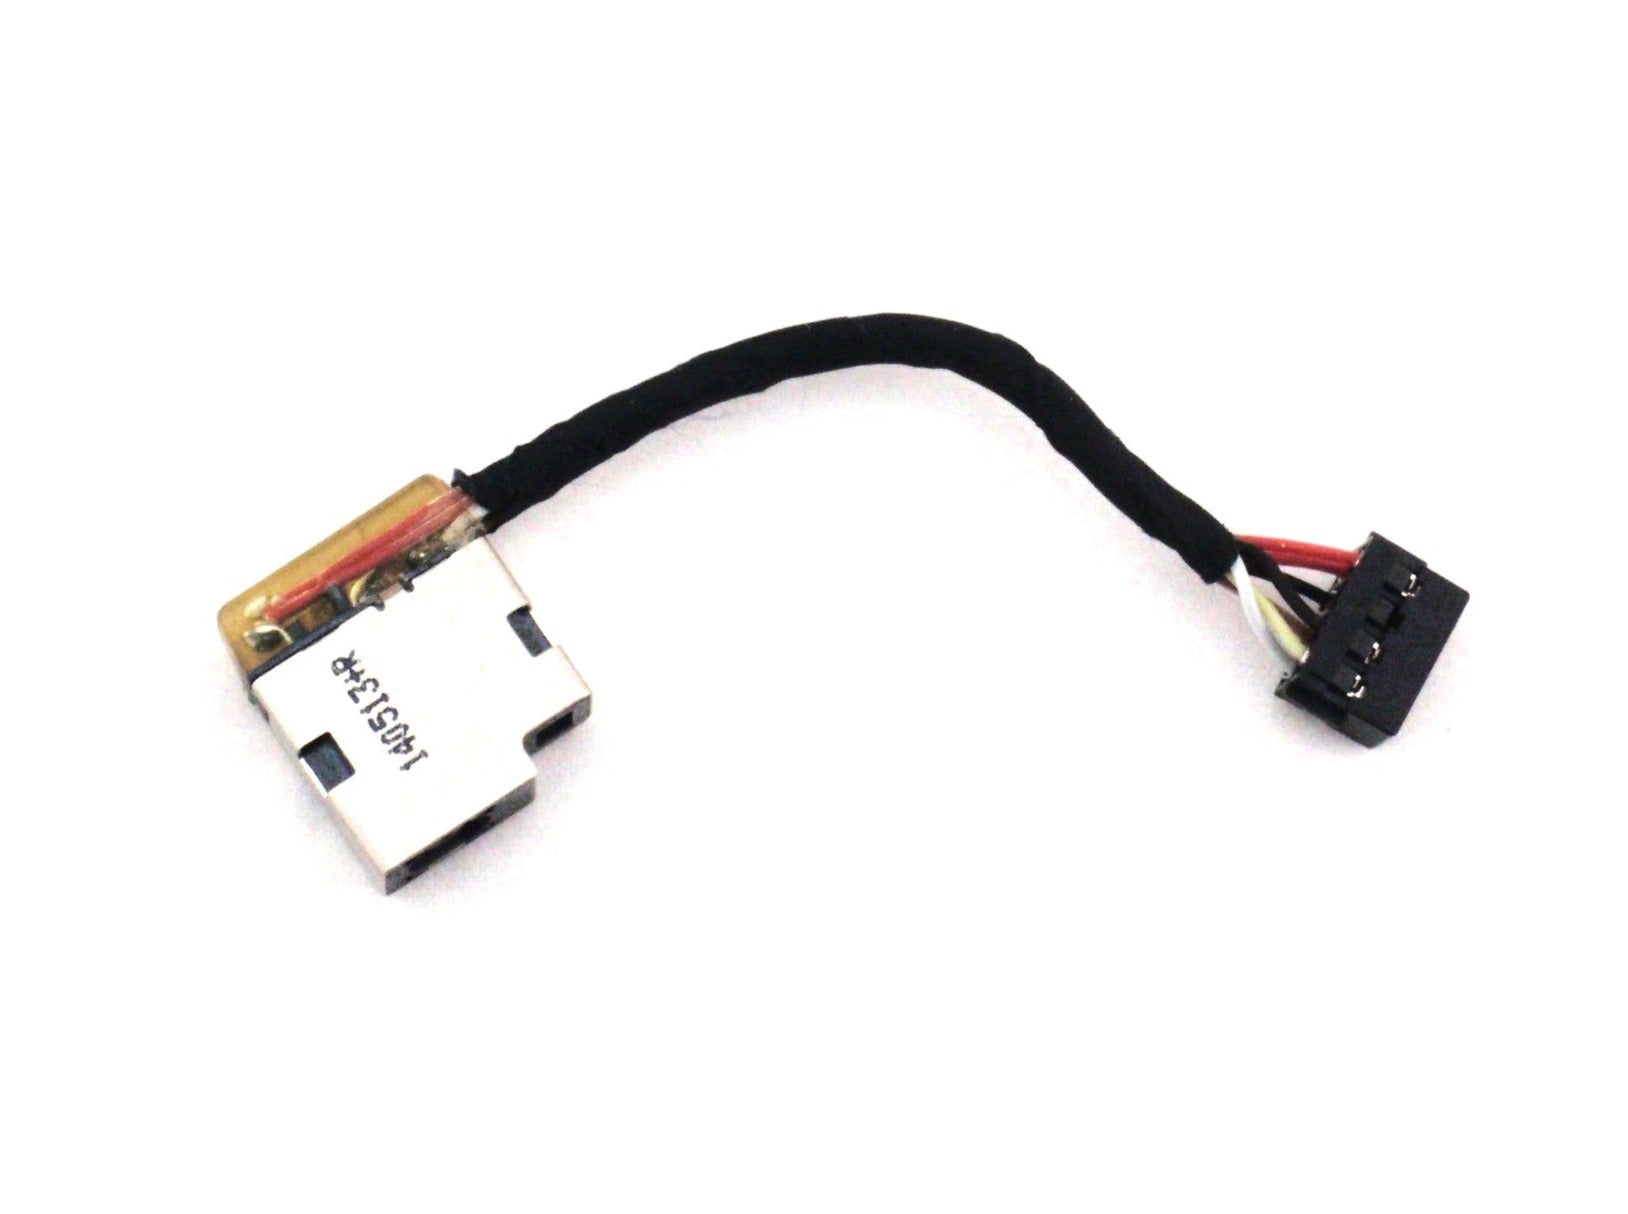 HP New DC In Power Jack Charging Port Cable Envy X2 15-C 776098-TD1 776098-SD1 776098-YD1 776098-FD1 783095-001